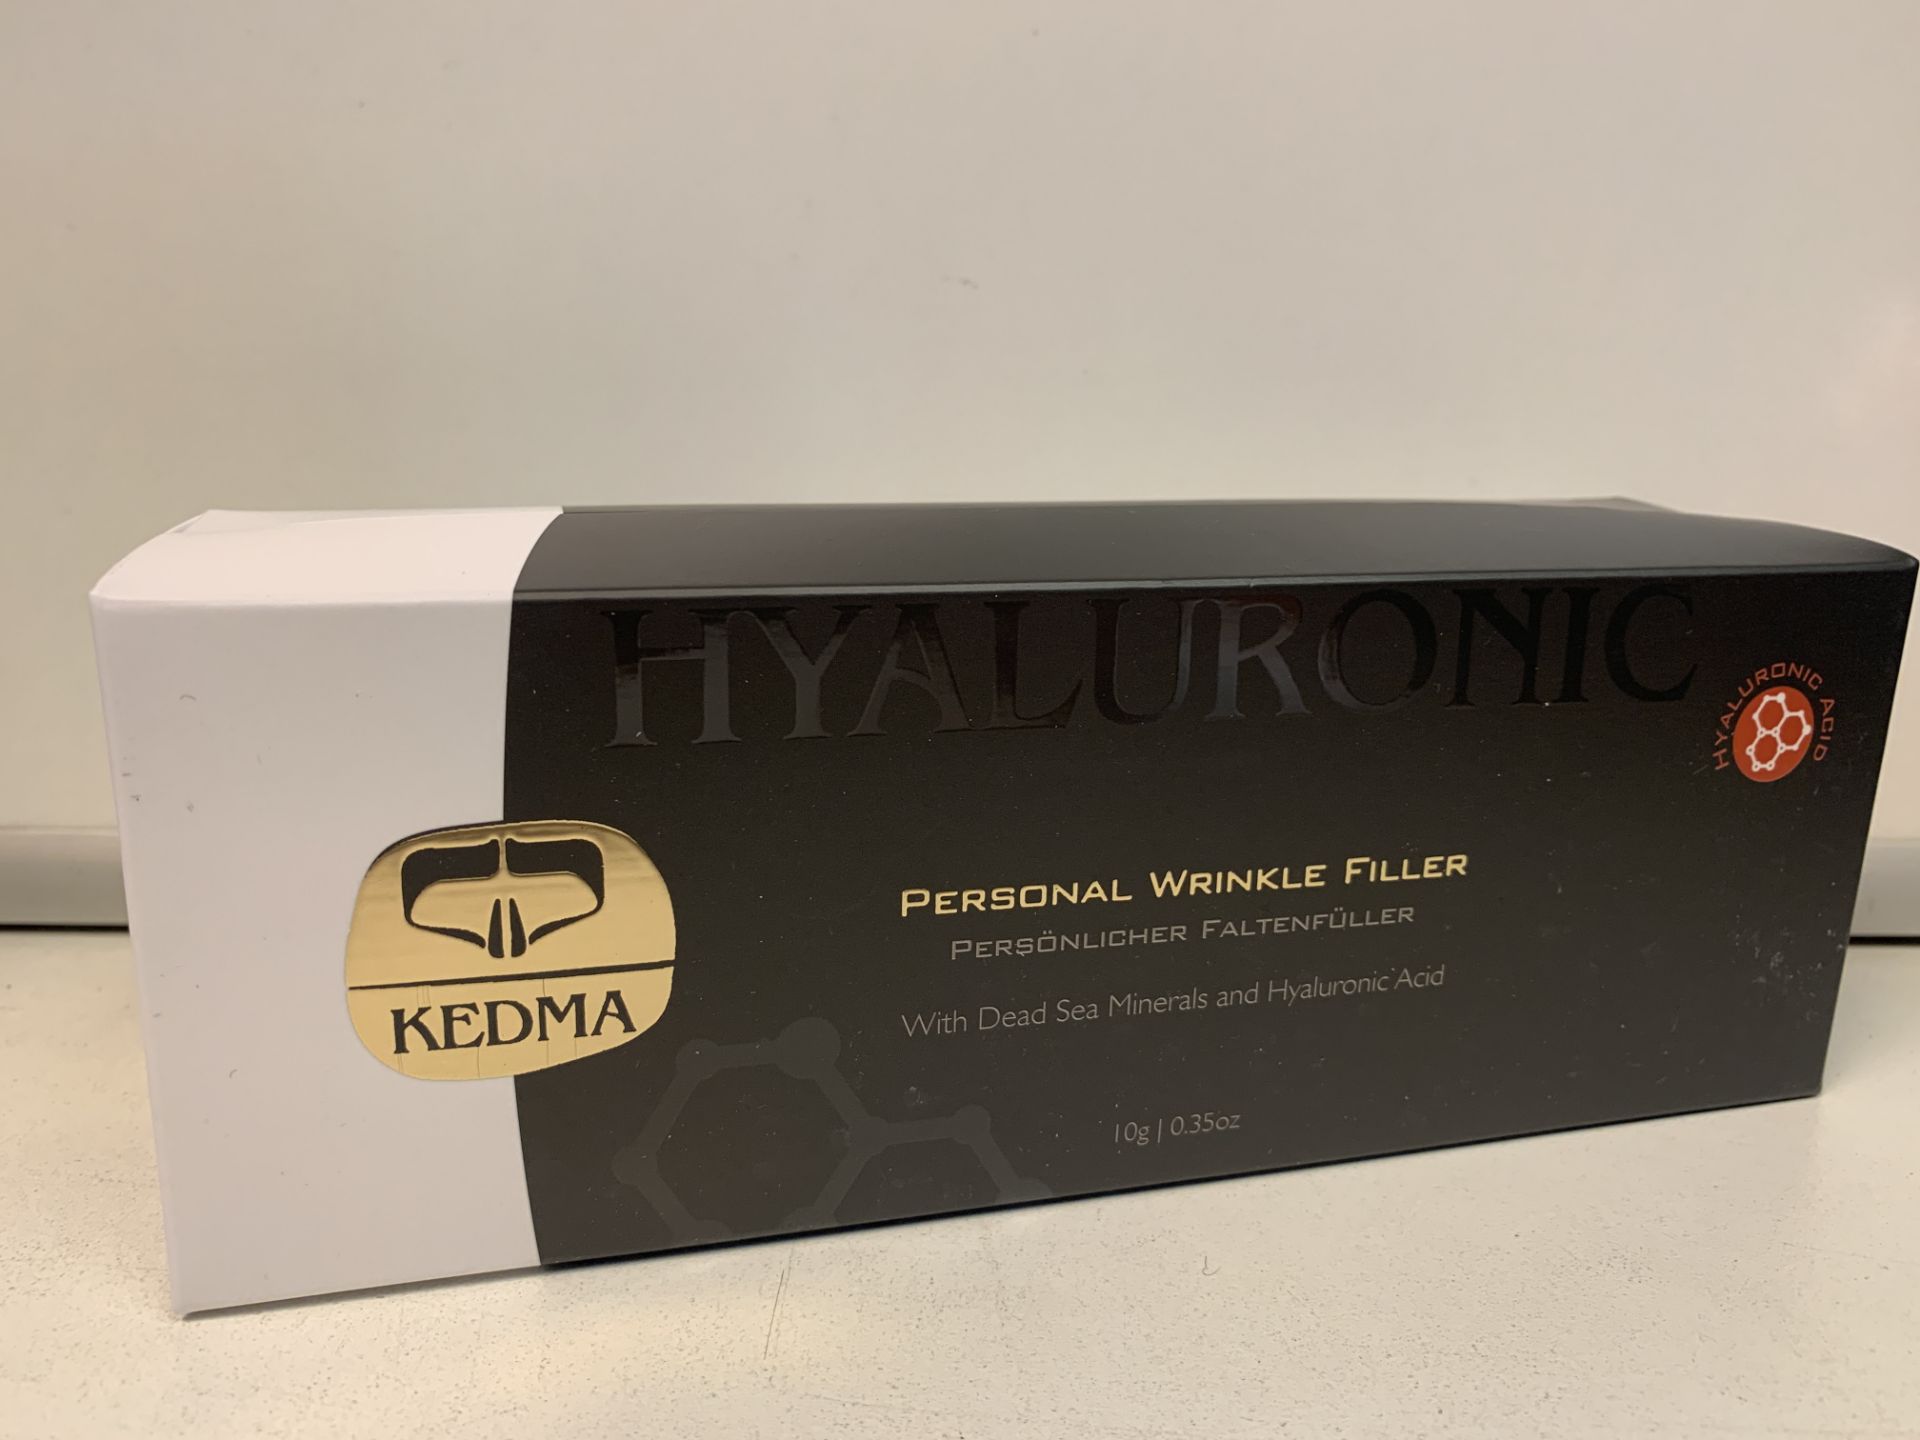 BRAND NEW KEDMA HYALURONIC PERSONAL WRINKLE FILLERS WITH DEAD SEA MINERALS AND HYALURONIC ACID